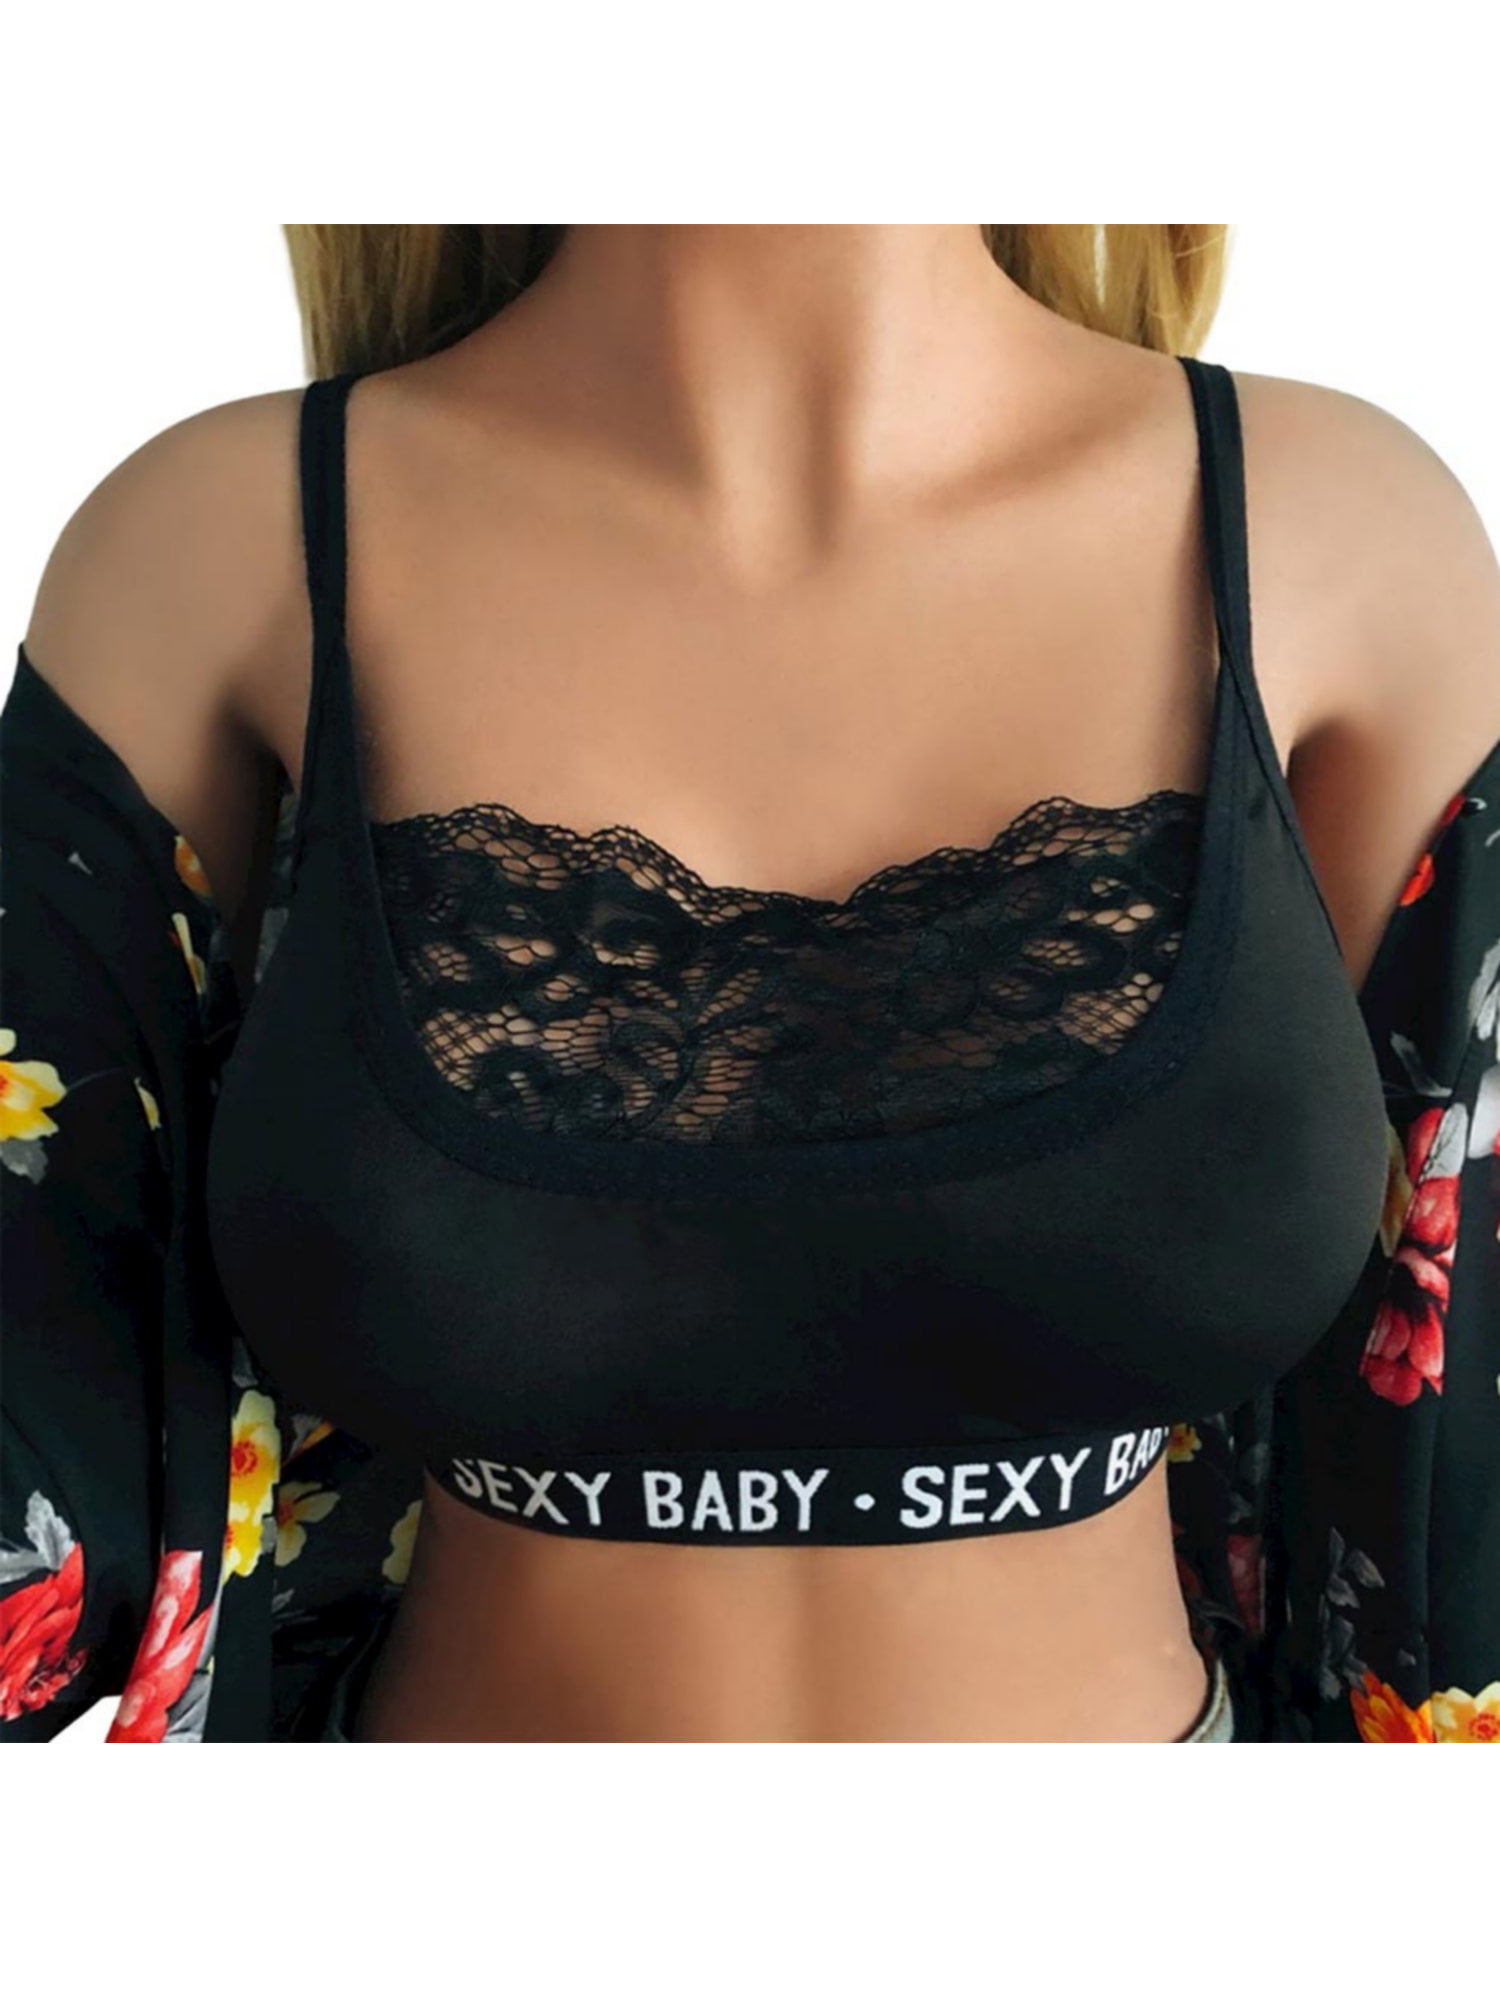 Womens Sexy Girls Lace Padded Bra Lady Push Up Bralette Lingerie Bras Top US